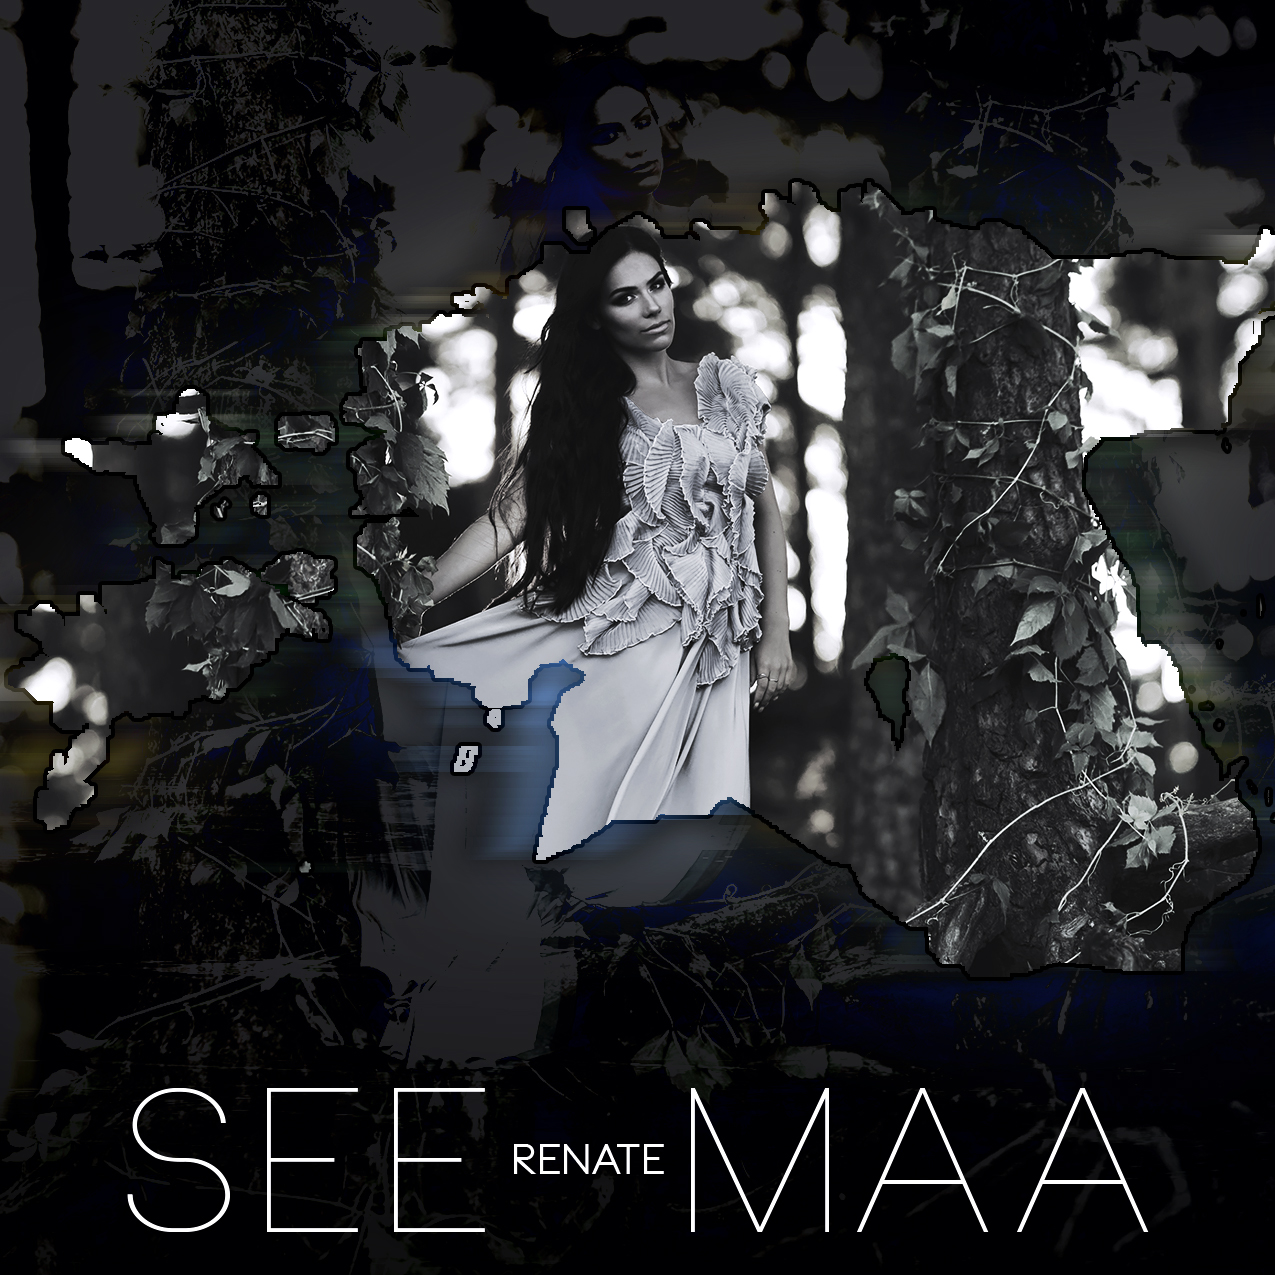 see-maa---itunes-cover-v4